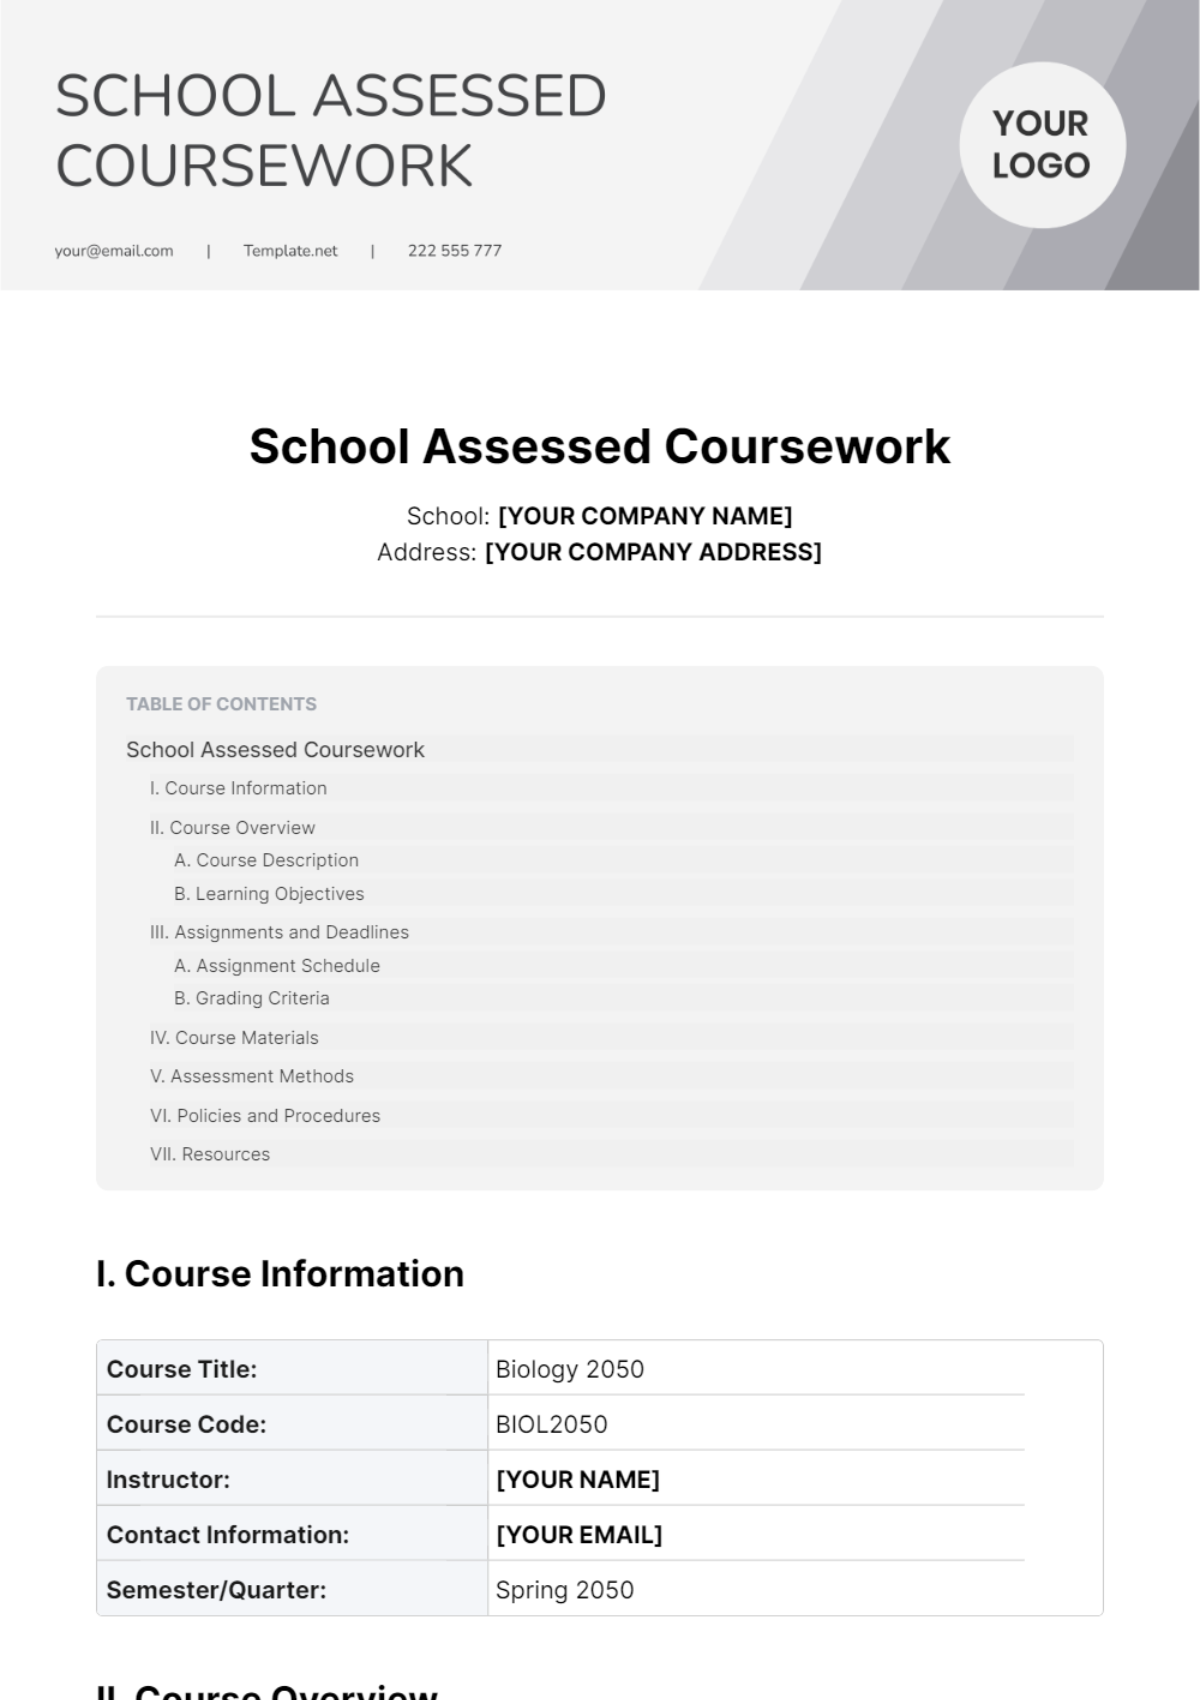 School Assessed Coursework Template